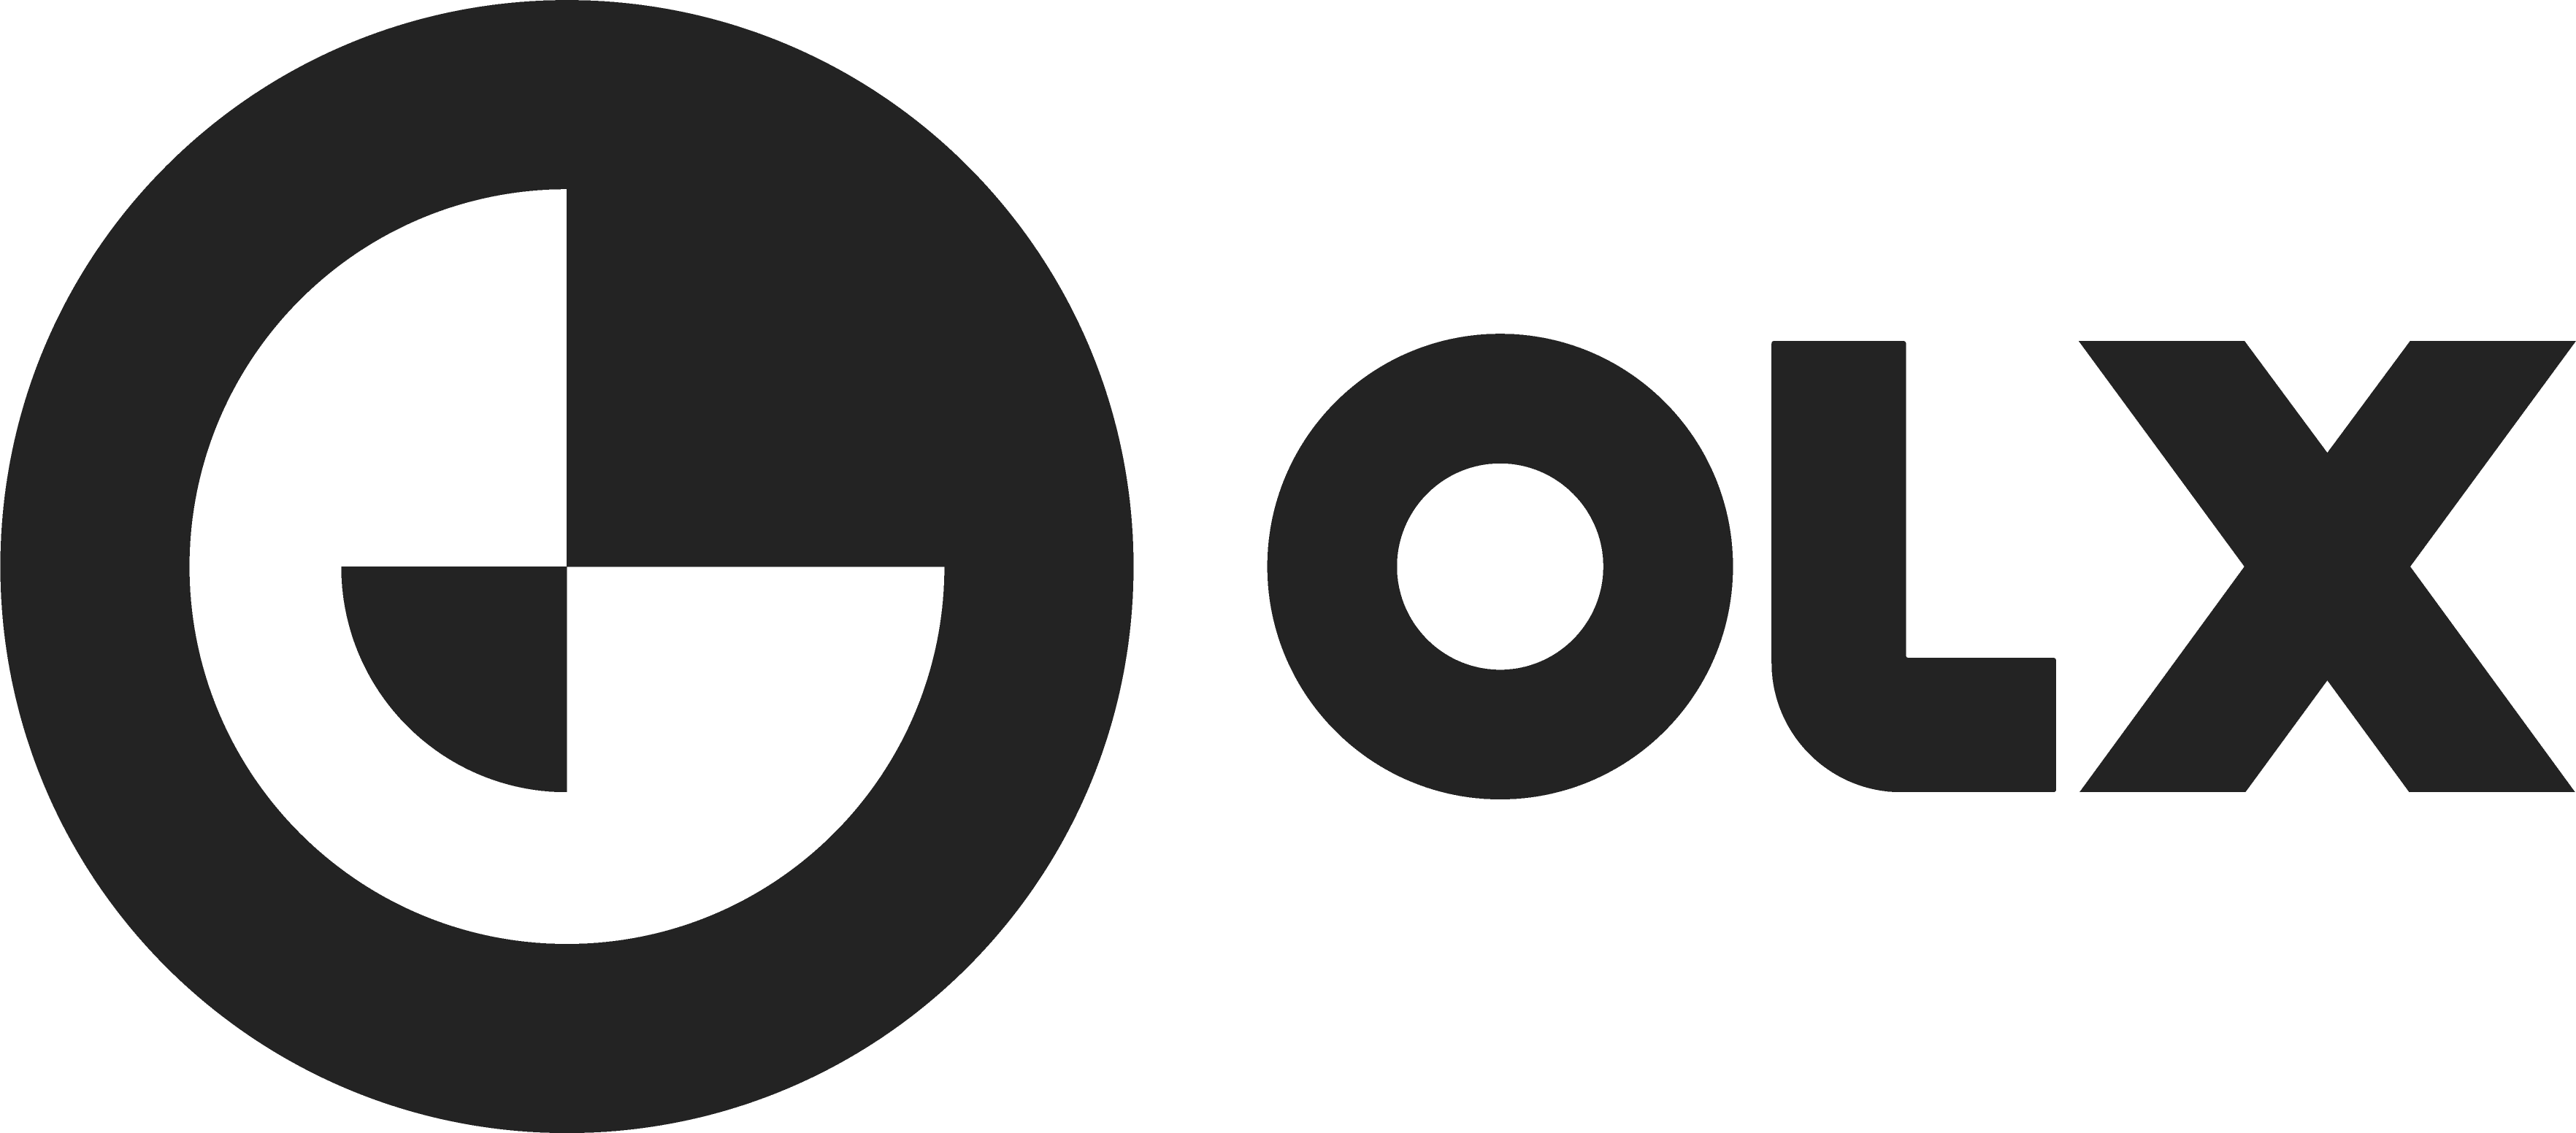 Prosus welcomes Romain Voog to lead OLX Group